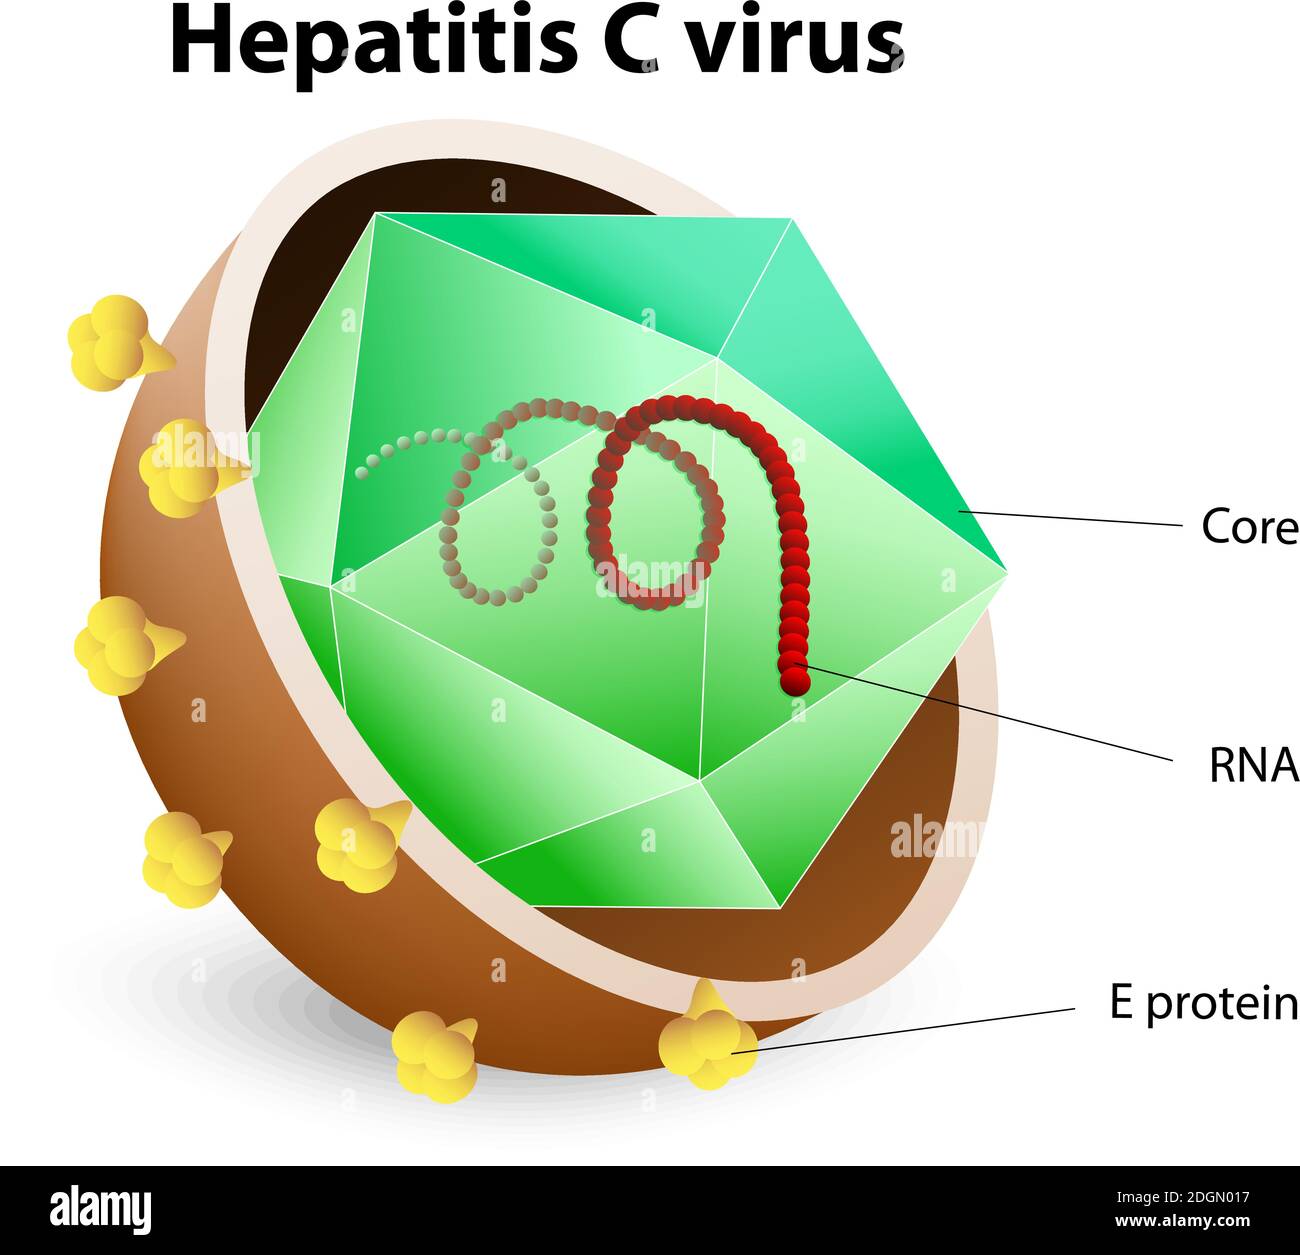 Hepatitis C virus. HCV. Hepatitis is an inflammation of the liver that can be caused by a group of viruses. Stock Vector